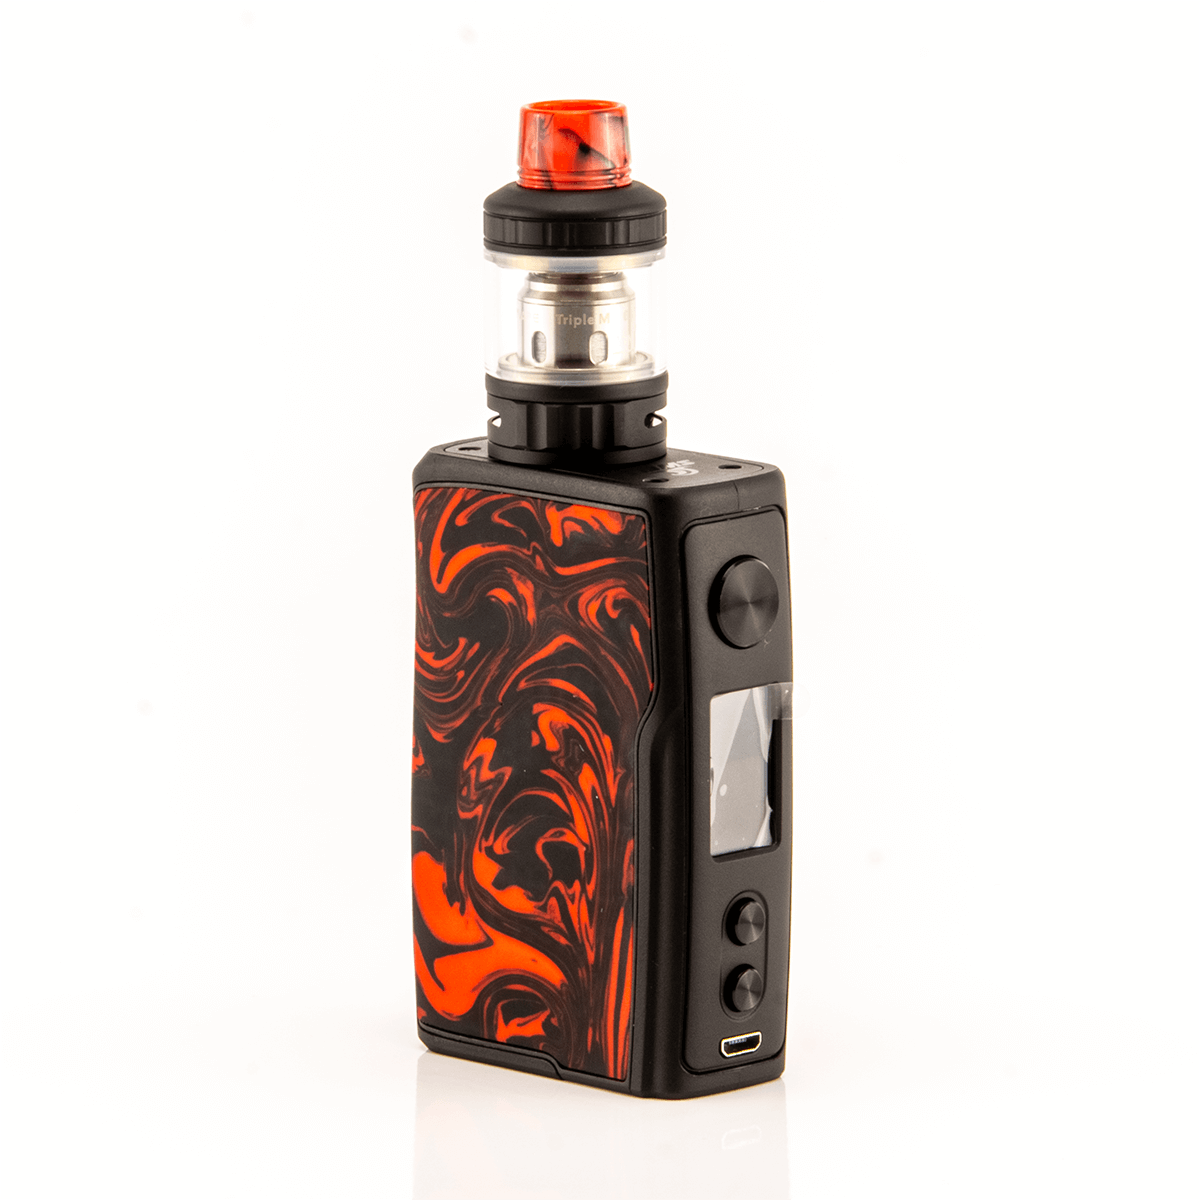 images/virtuemart/product/Vandy Vape - Swell Kit (Flame Red).png